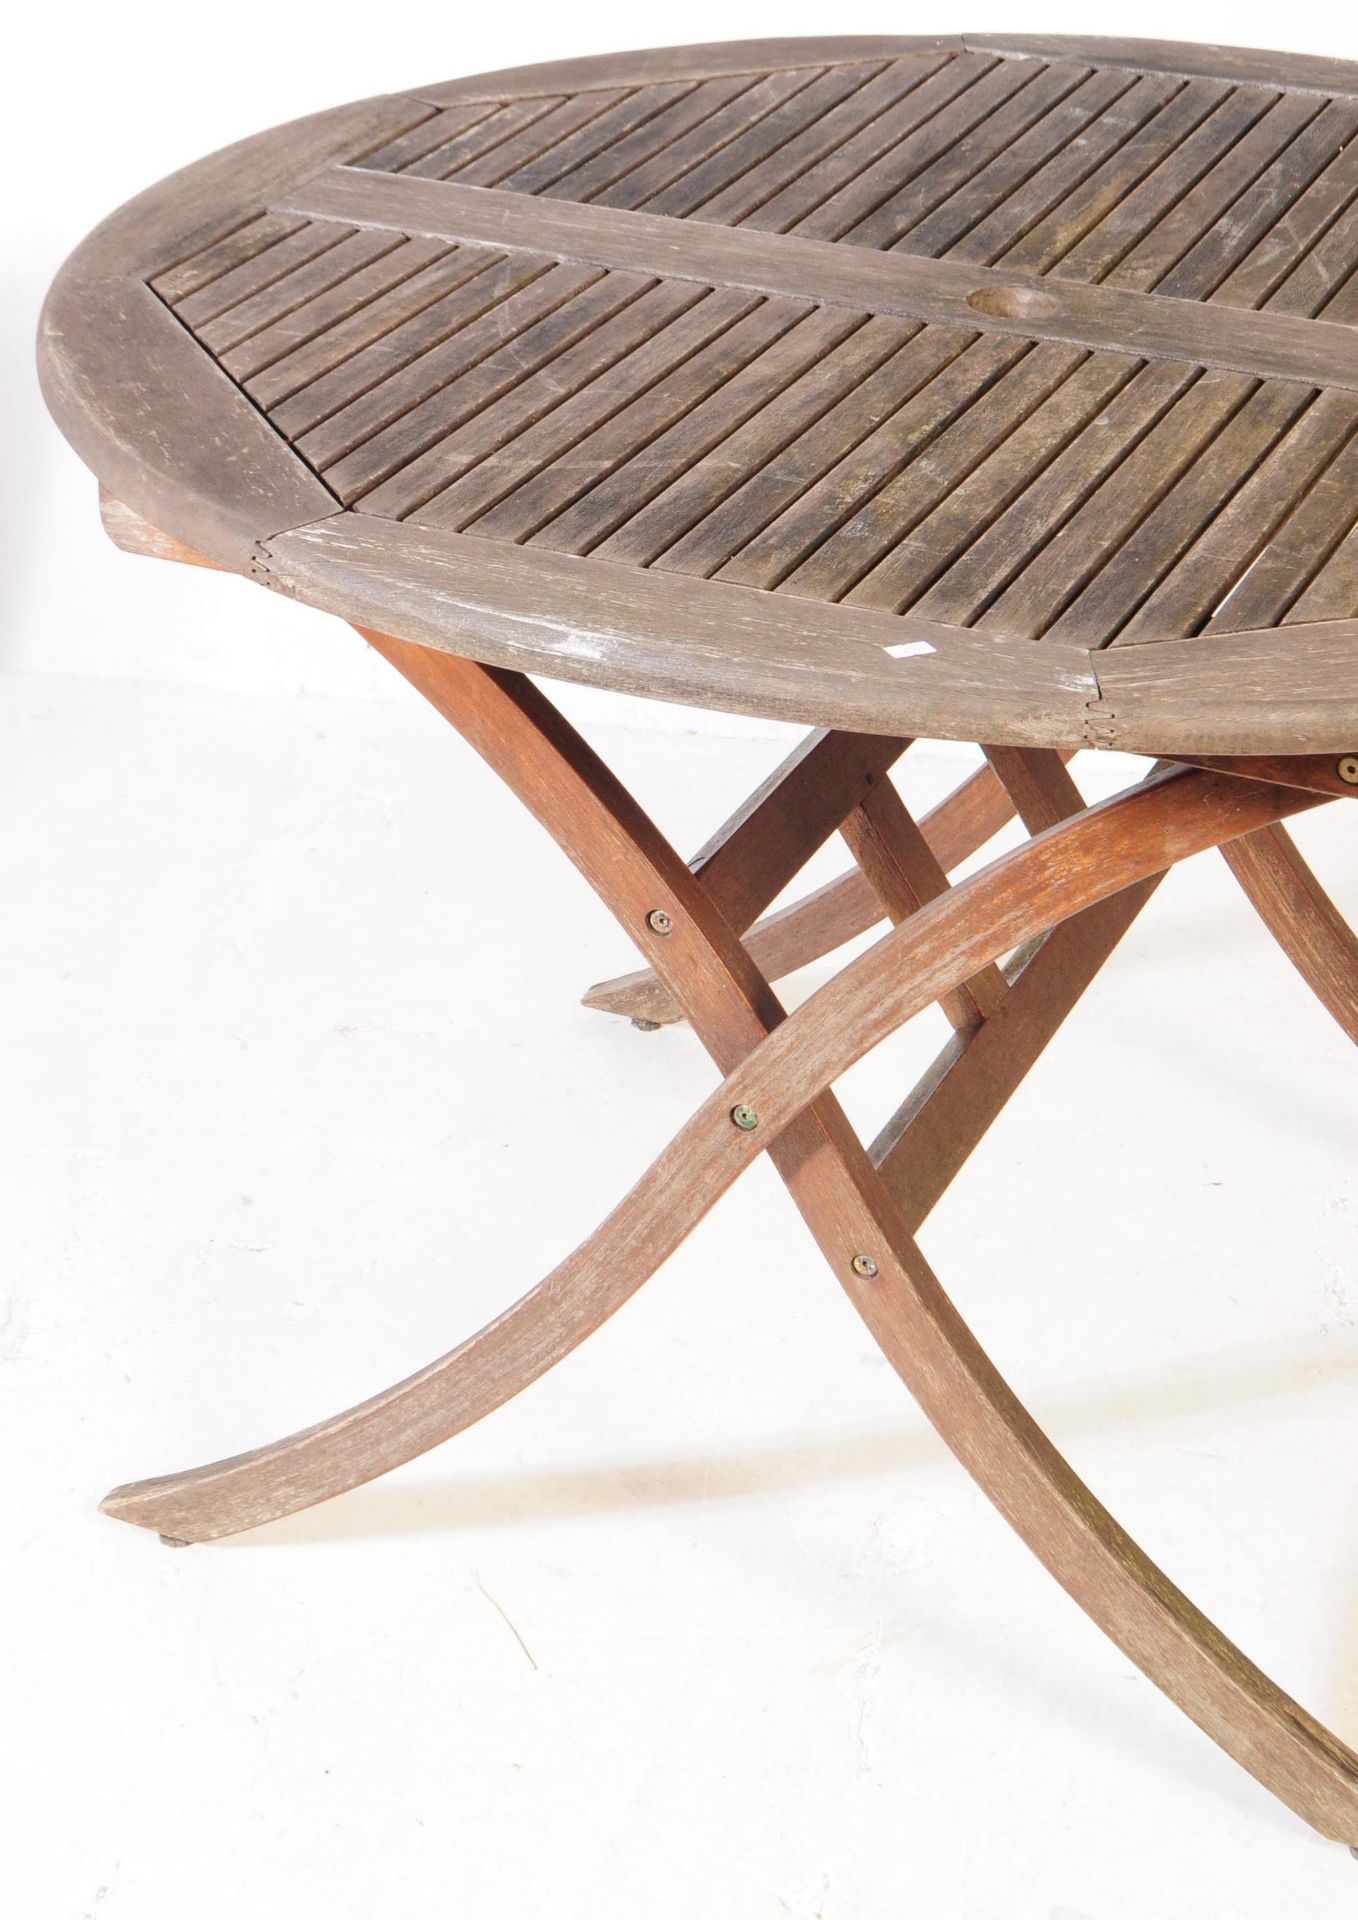 CONTEMPORARY TEAK GARDEN TABLE & FOLDING CHAIRS - Image 4 of 7